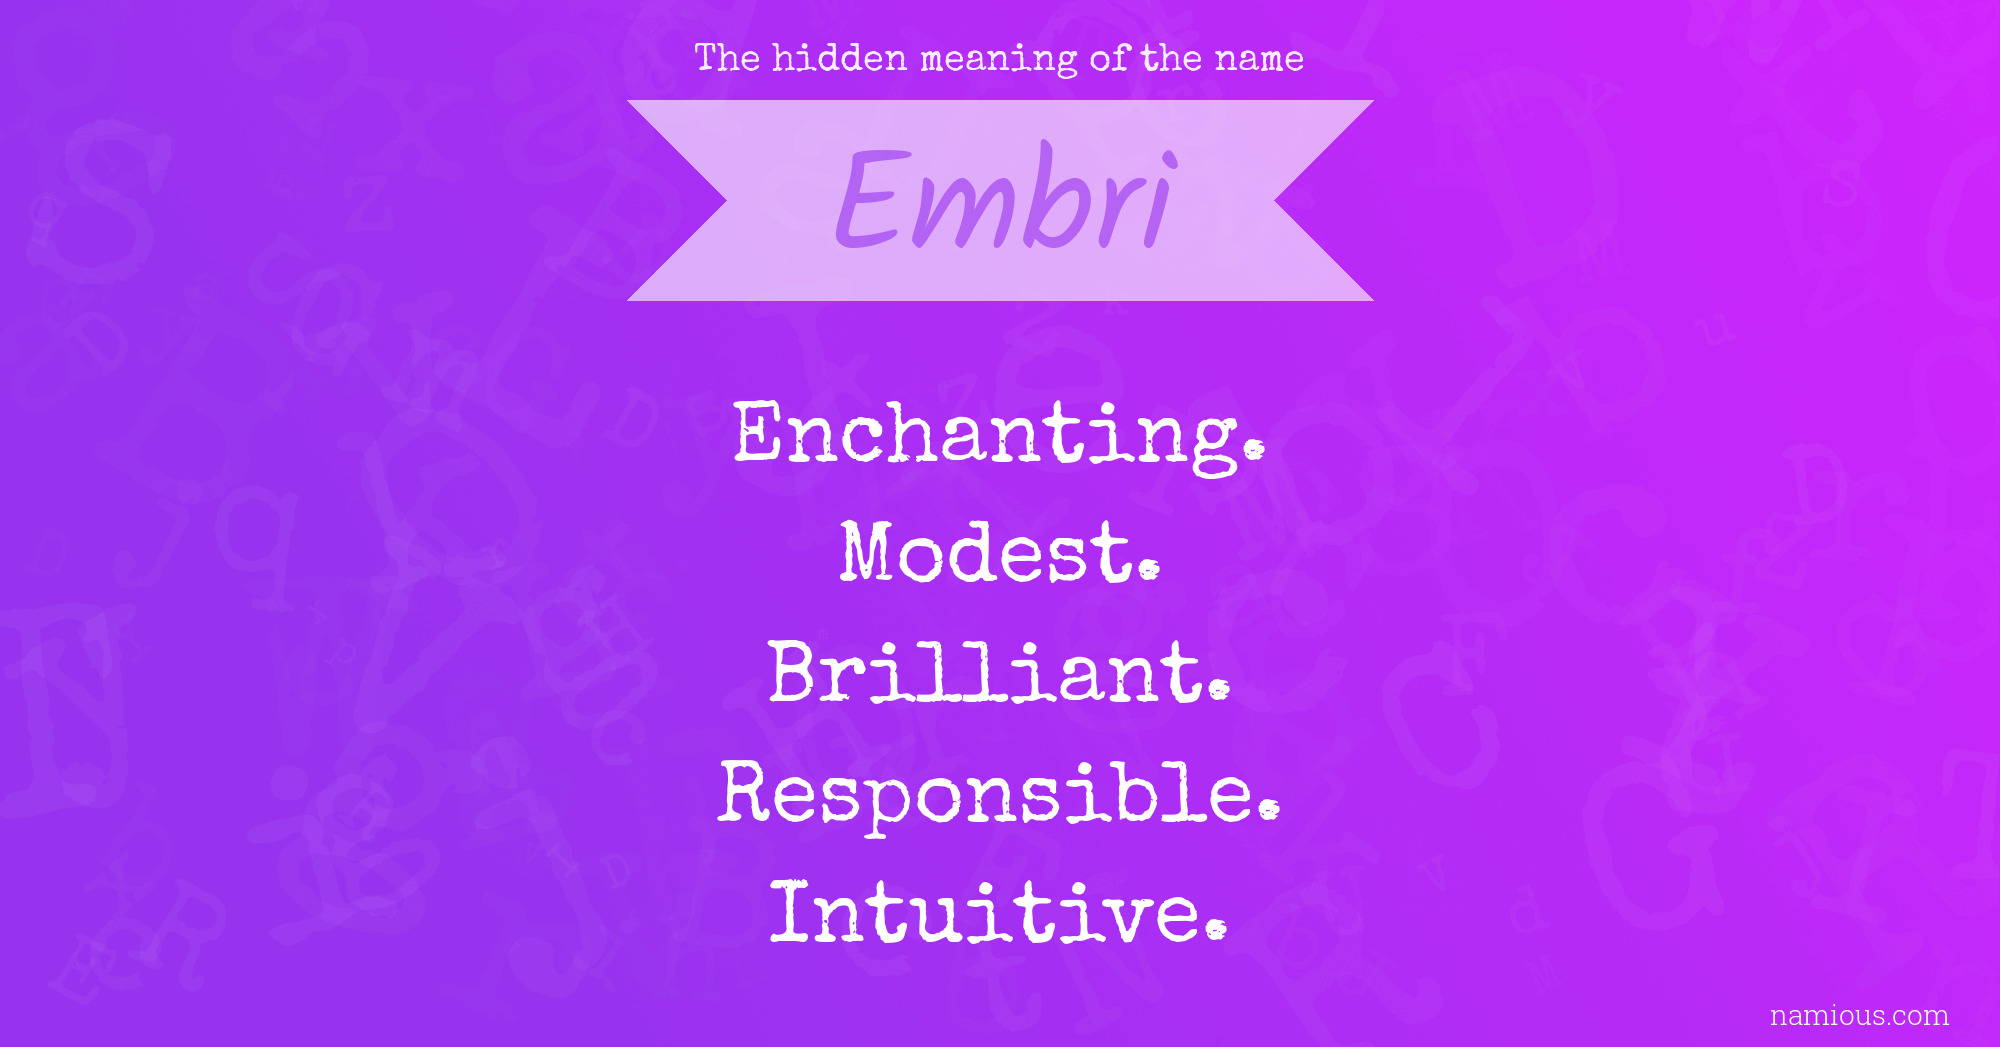 The hidden meaning of the name Embri